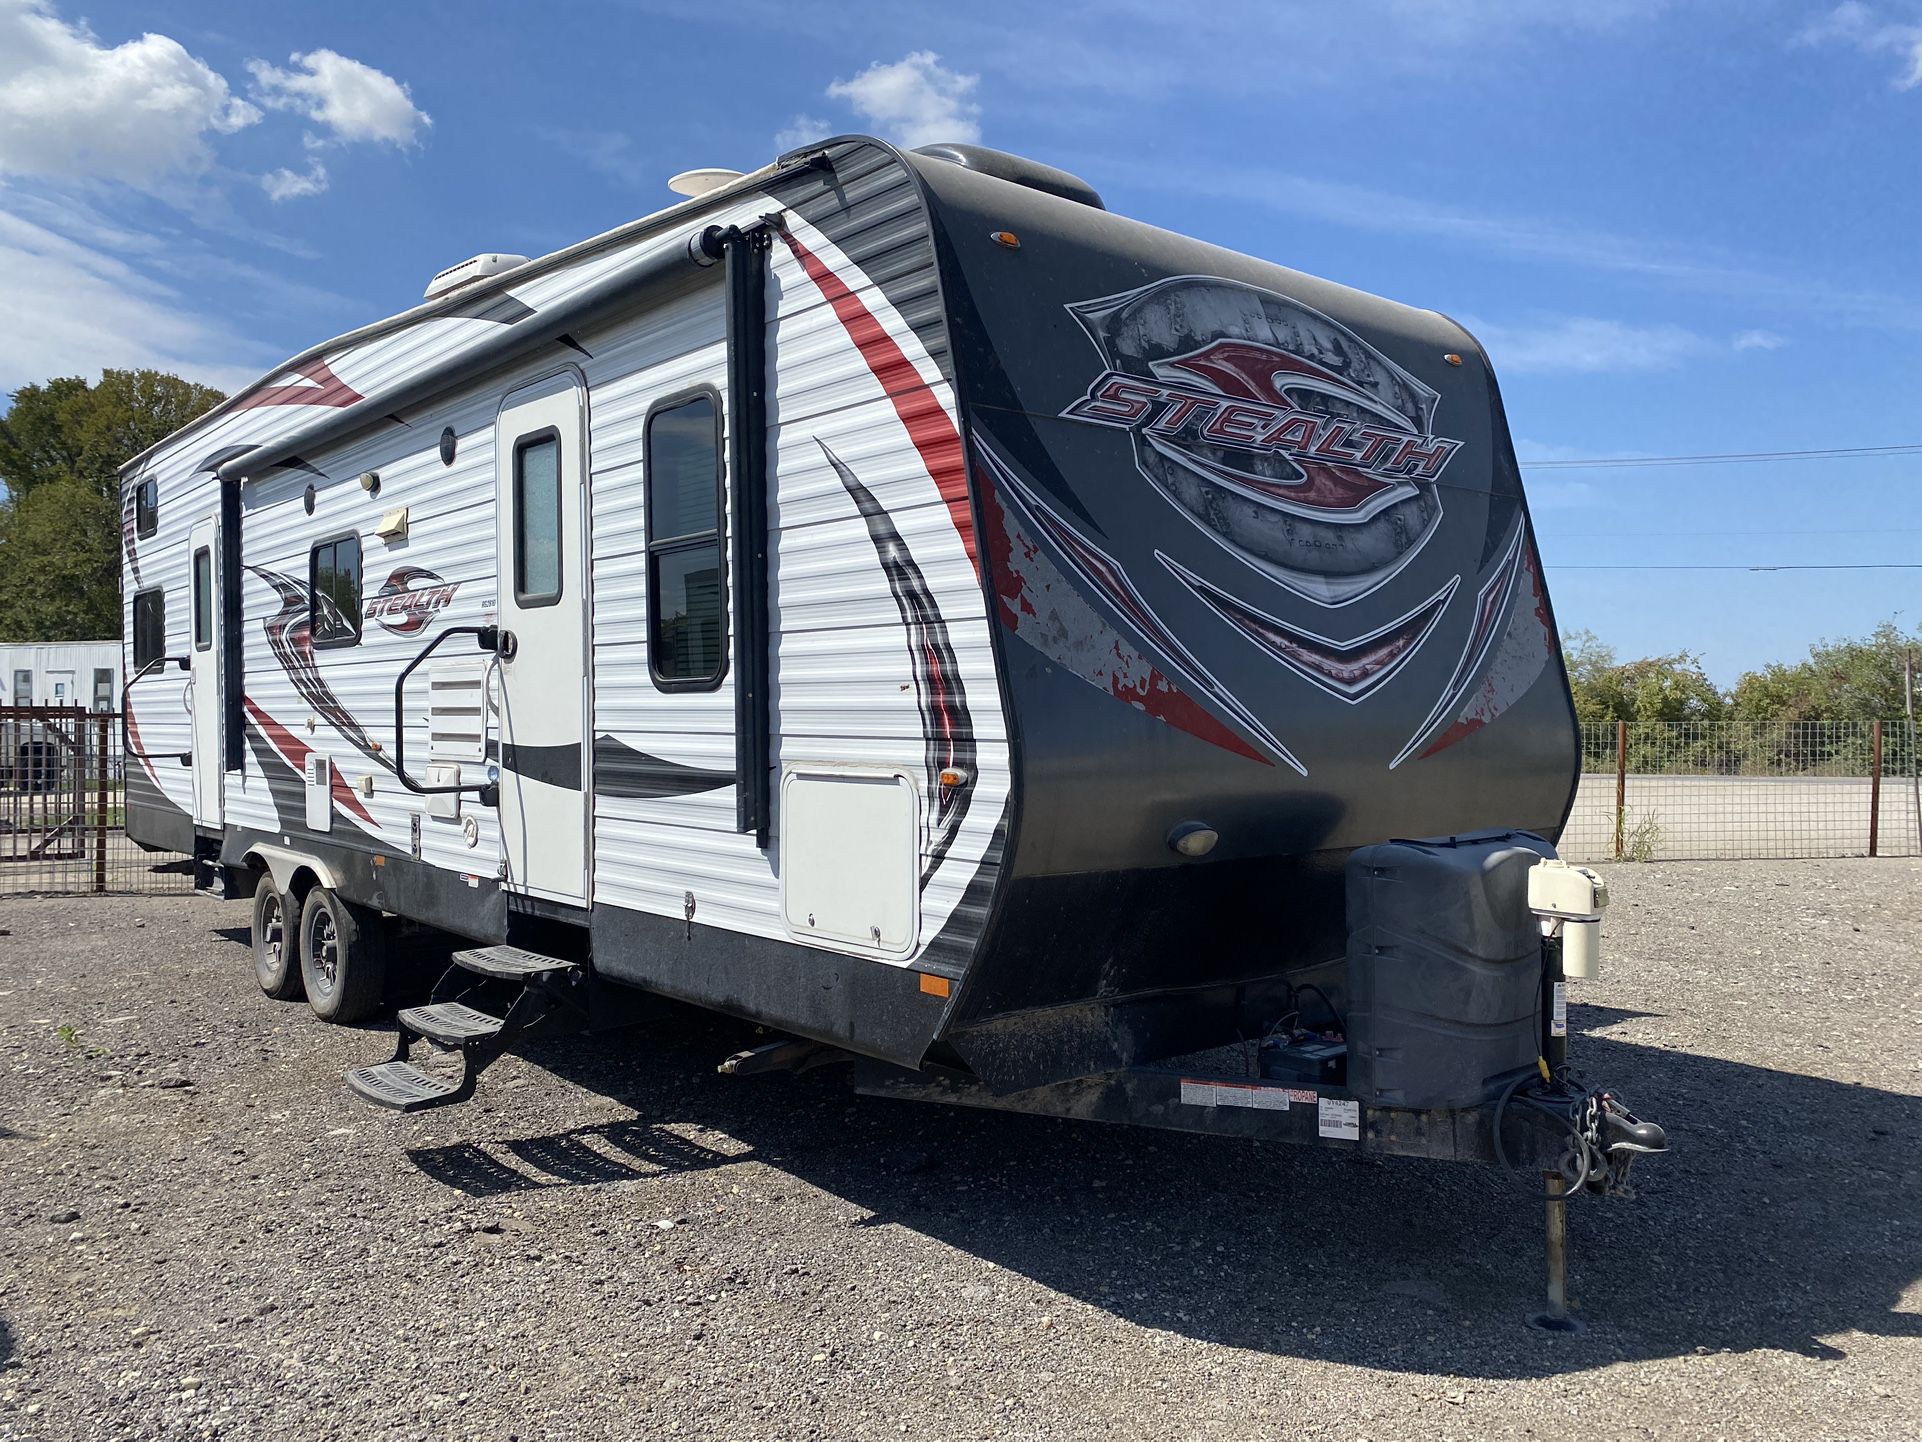 2016 Stealth cash Rv sale Only 